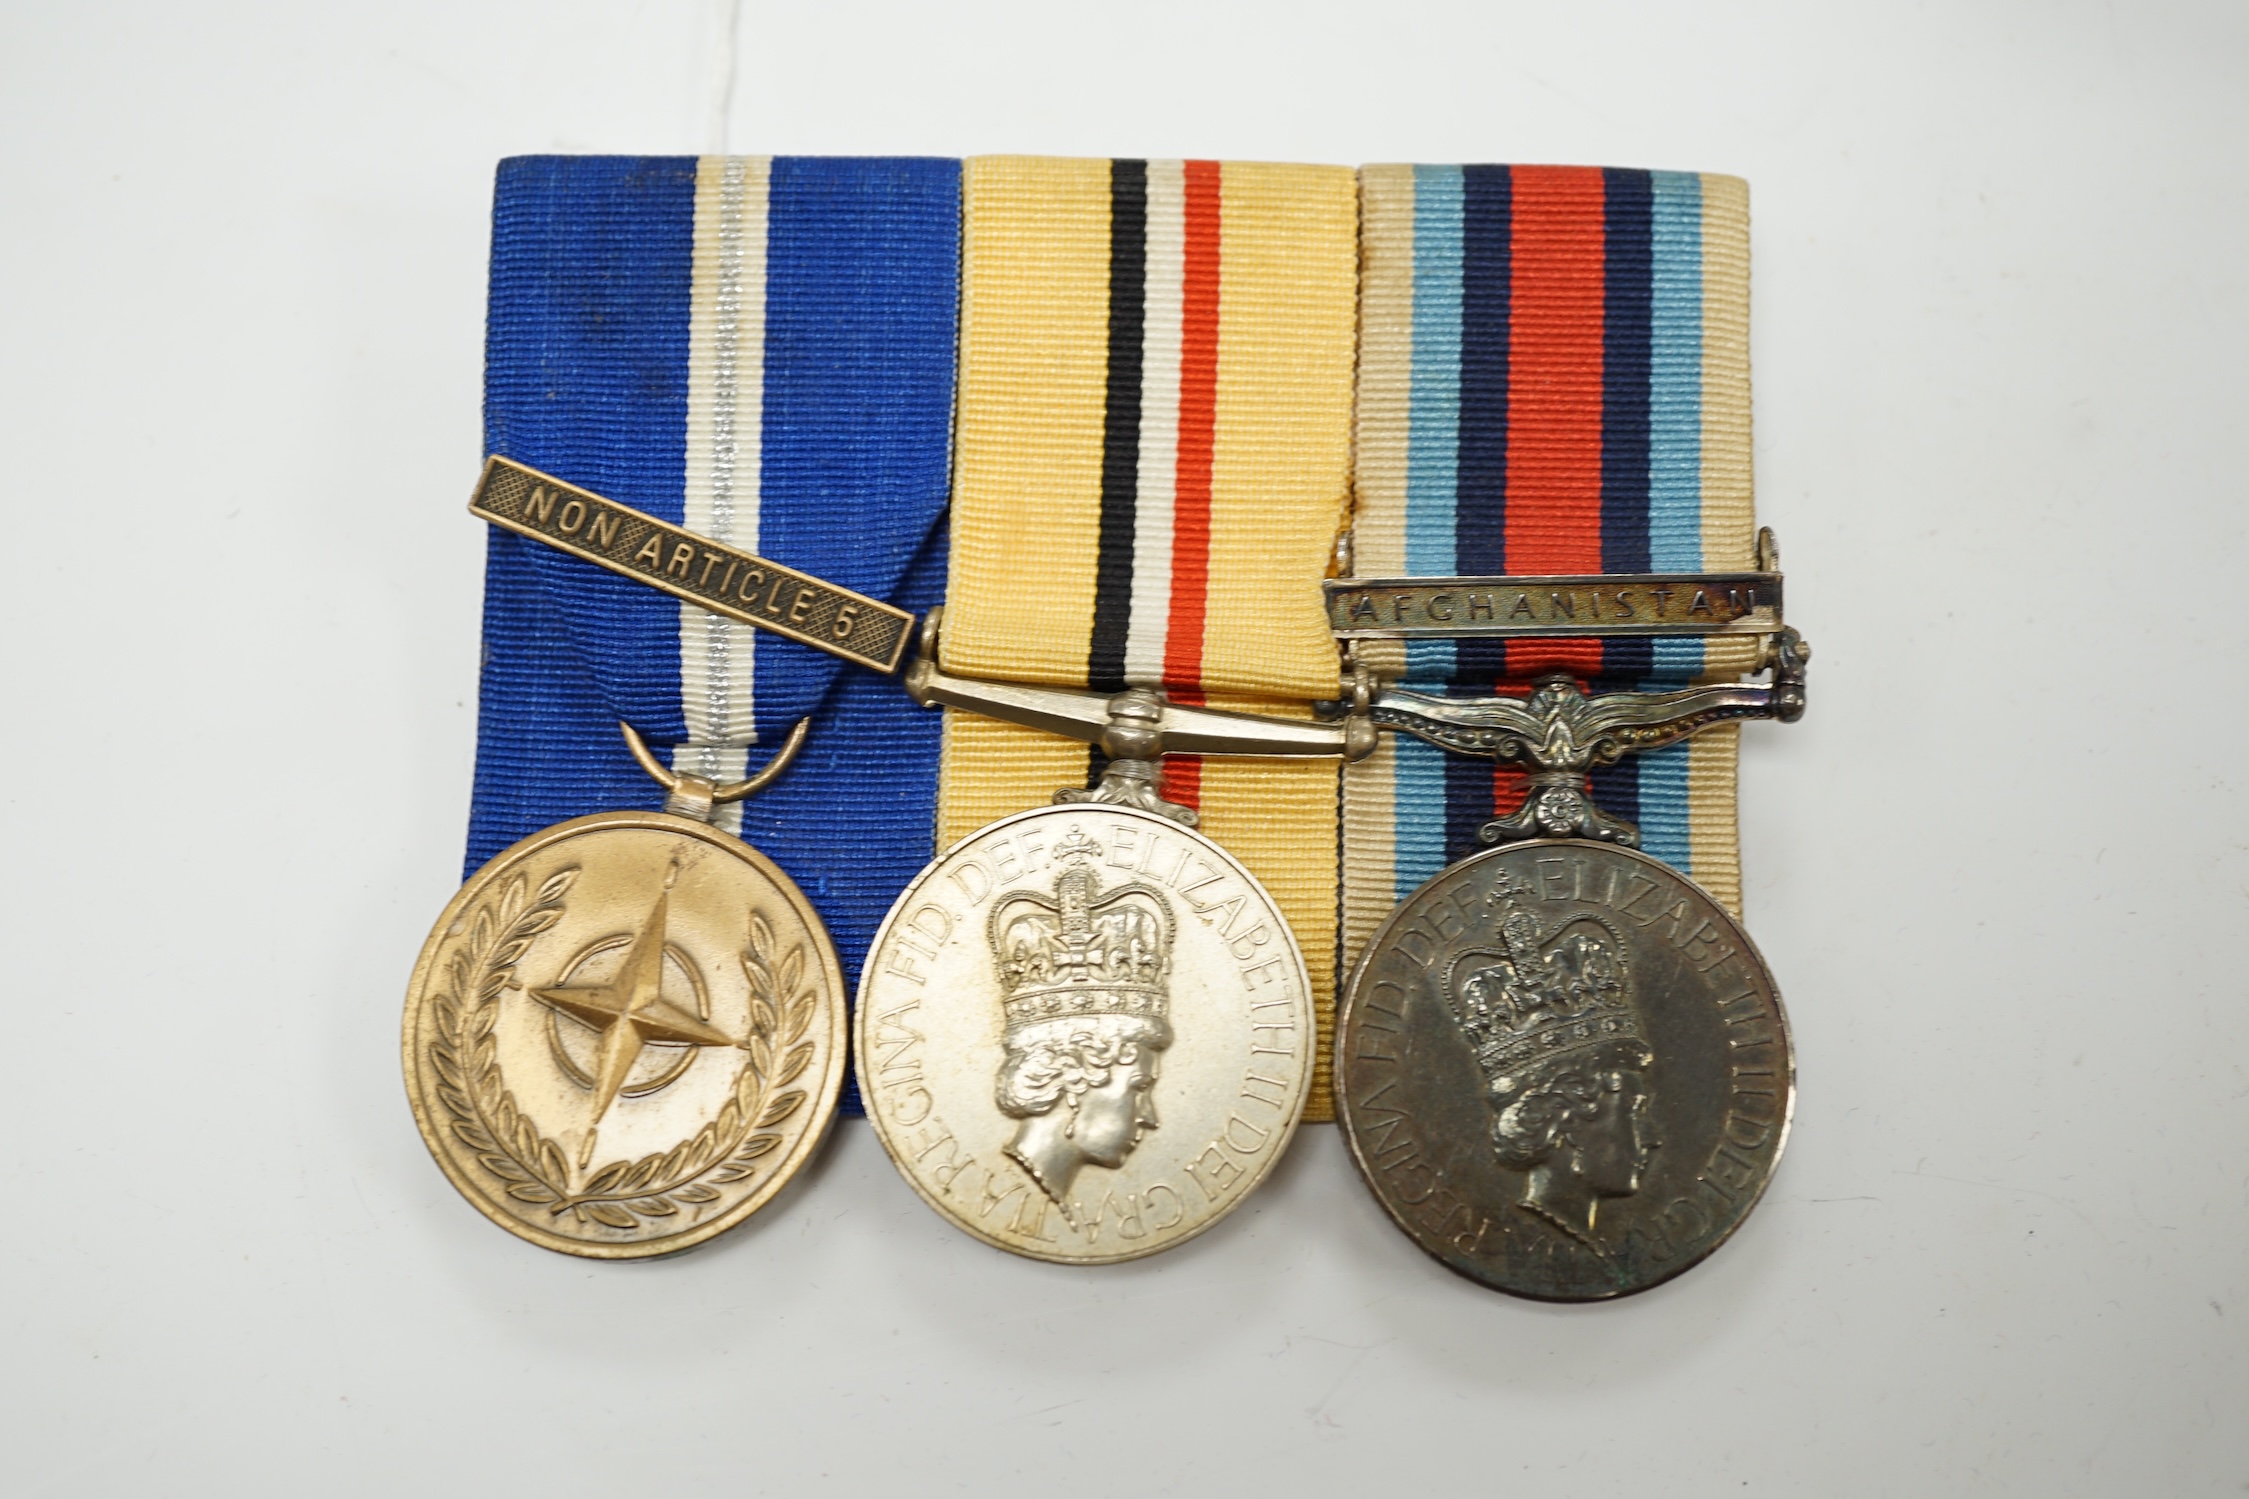 A Queen Elizabeth II medal group awarded to Signaller R.V. Johnson, Royal Signals, comprising; an Iraq Medal, an Operational Service Medal with a bar for Afghanistan and a UN Medal with a bar for Non Article 5, mounted t